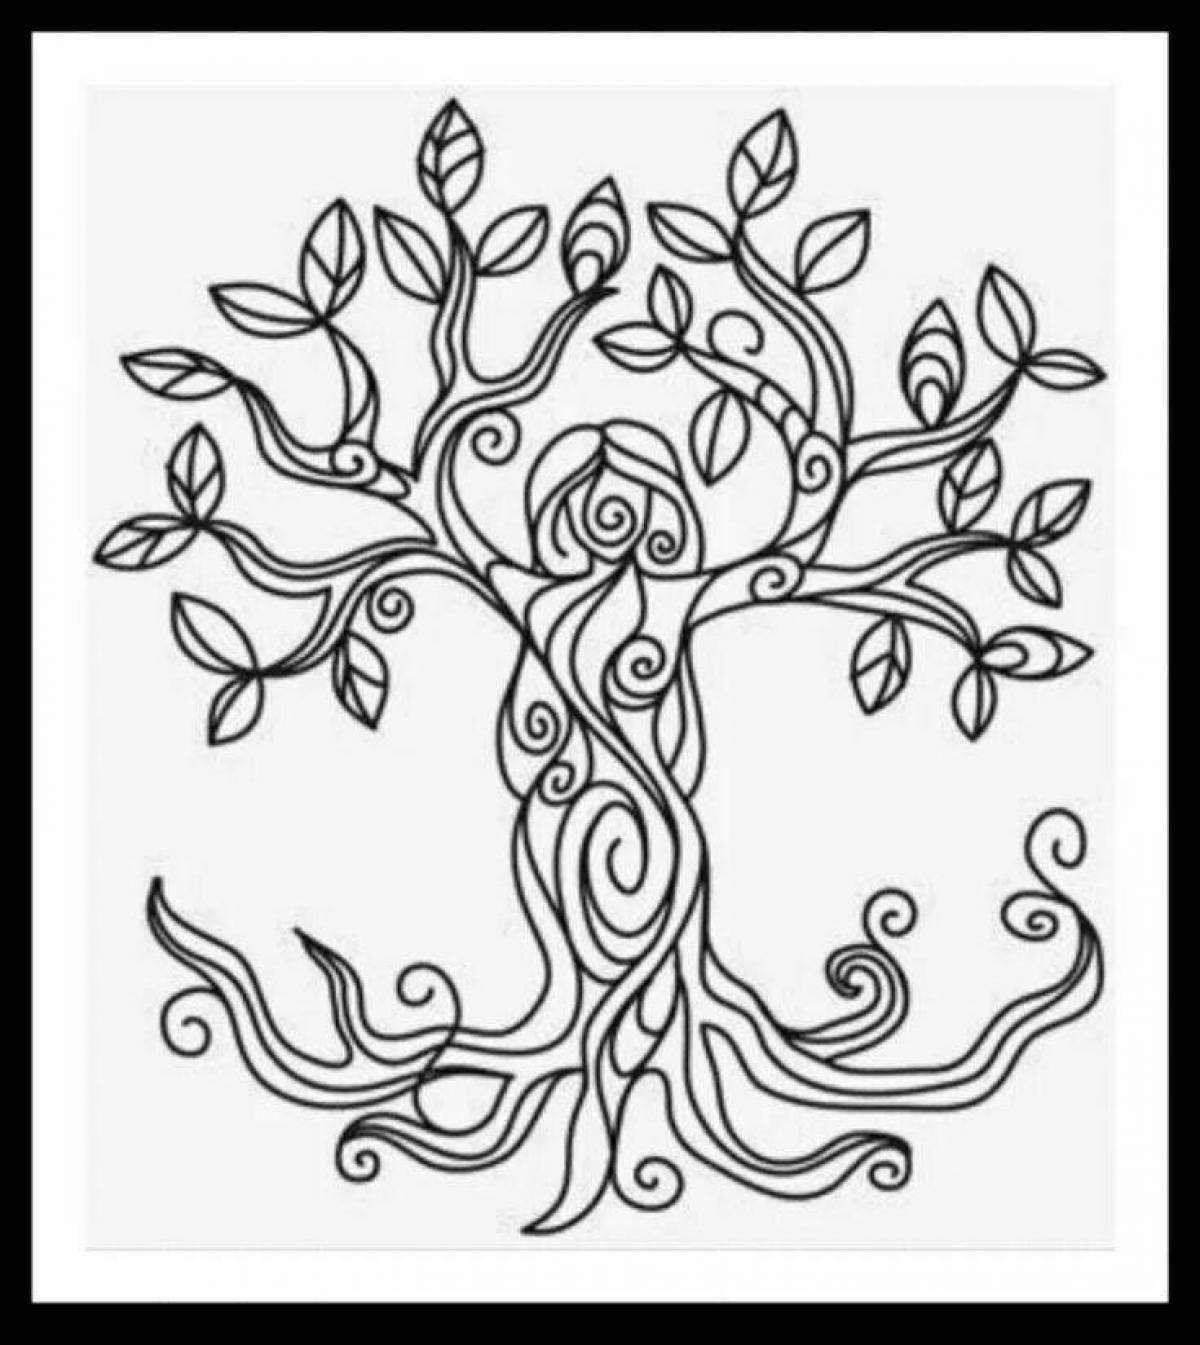 Glitter tree of life coloring book